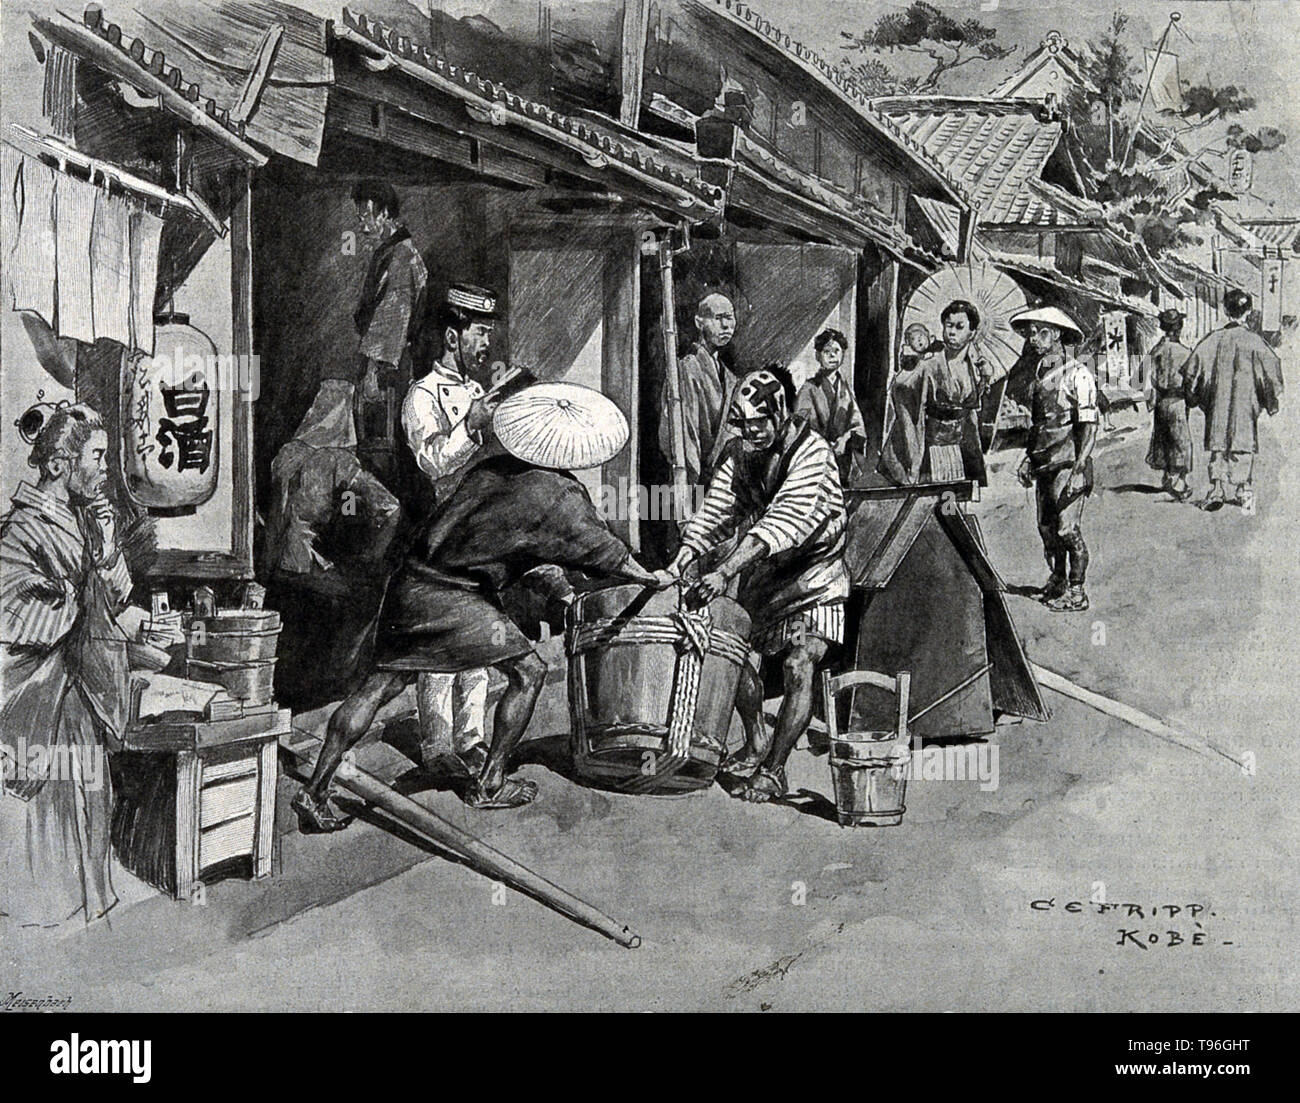 Disposal of the dead, under police supervision during a cholera epidemic in Japan. The third cholera pandemic mainly affected Russia, with over one million deaths. In 1852, cholera spread east to Indonesia, and later was carried to China and Japan in 1854. The Philippines were infected in 1858 and Korea in 1859. In 1859, an outbreak in Bengal contributed to transmission of the disease by travelers and troops to Iran, Iraq, Arabia and Russia. Stock Photo